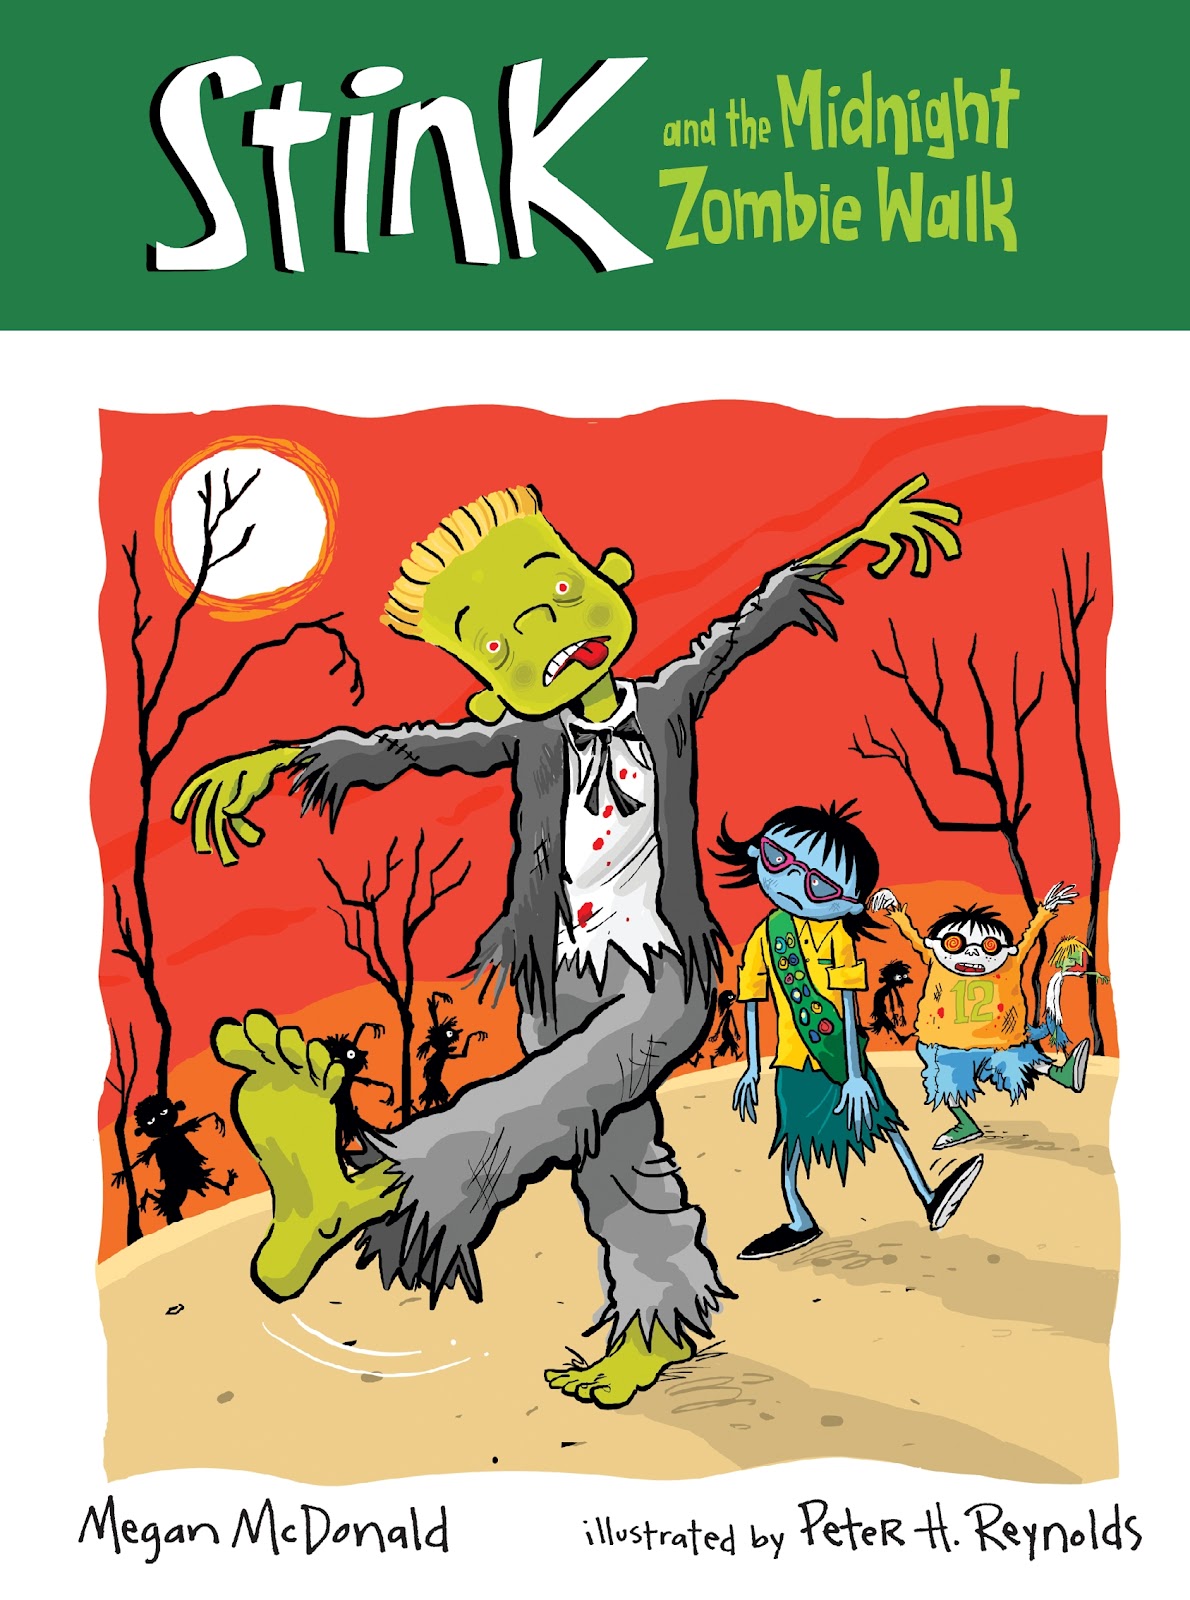 366 Books My Year Of Reading 134 Stink And The Midnight Zombie Walk By Megan Mcdonald